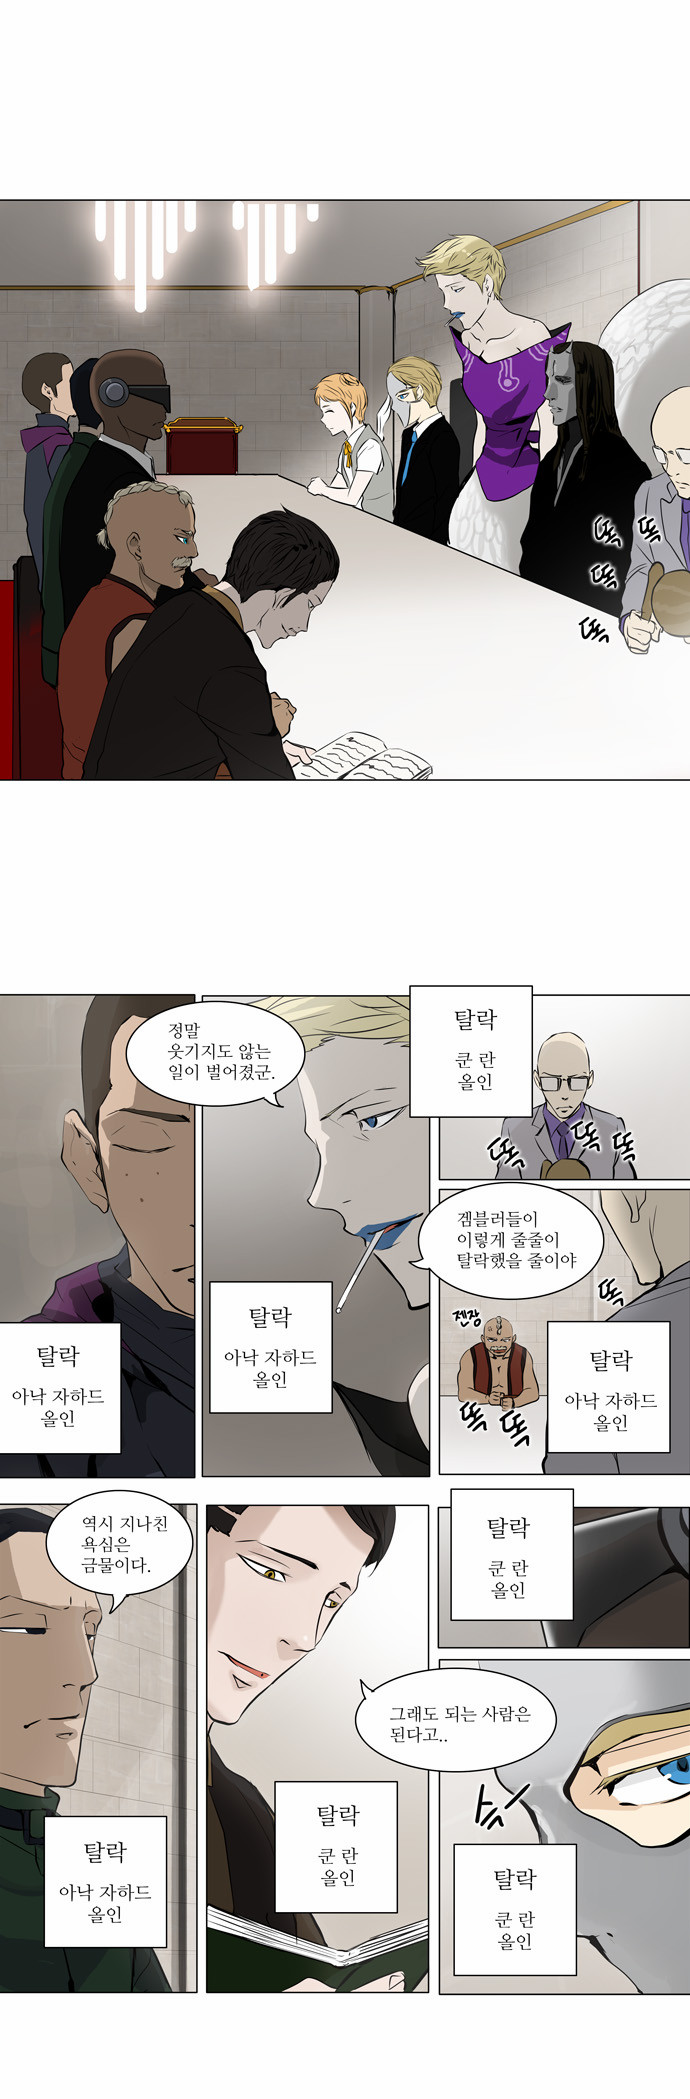 Tower of God - Chapter 160 - Page 1